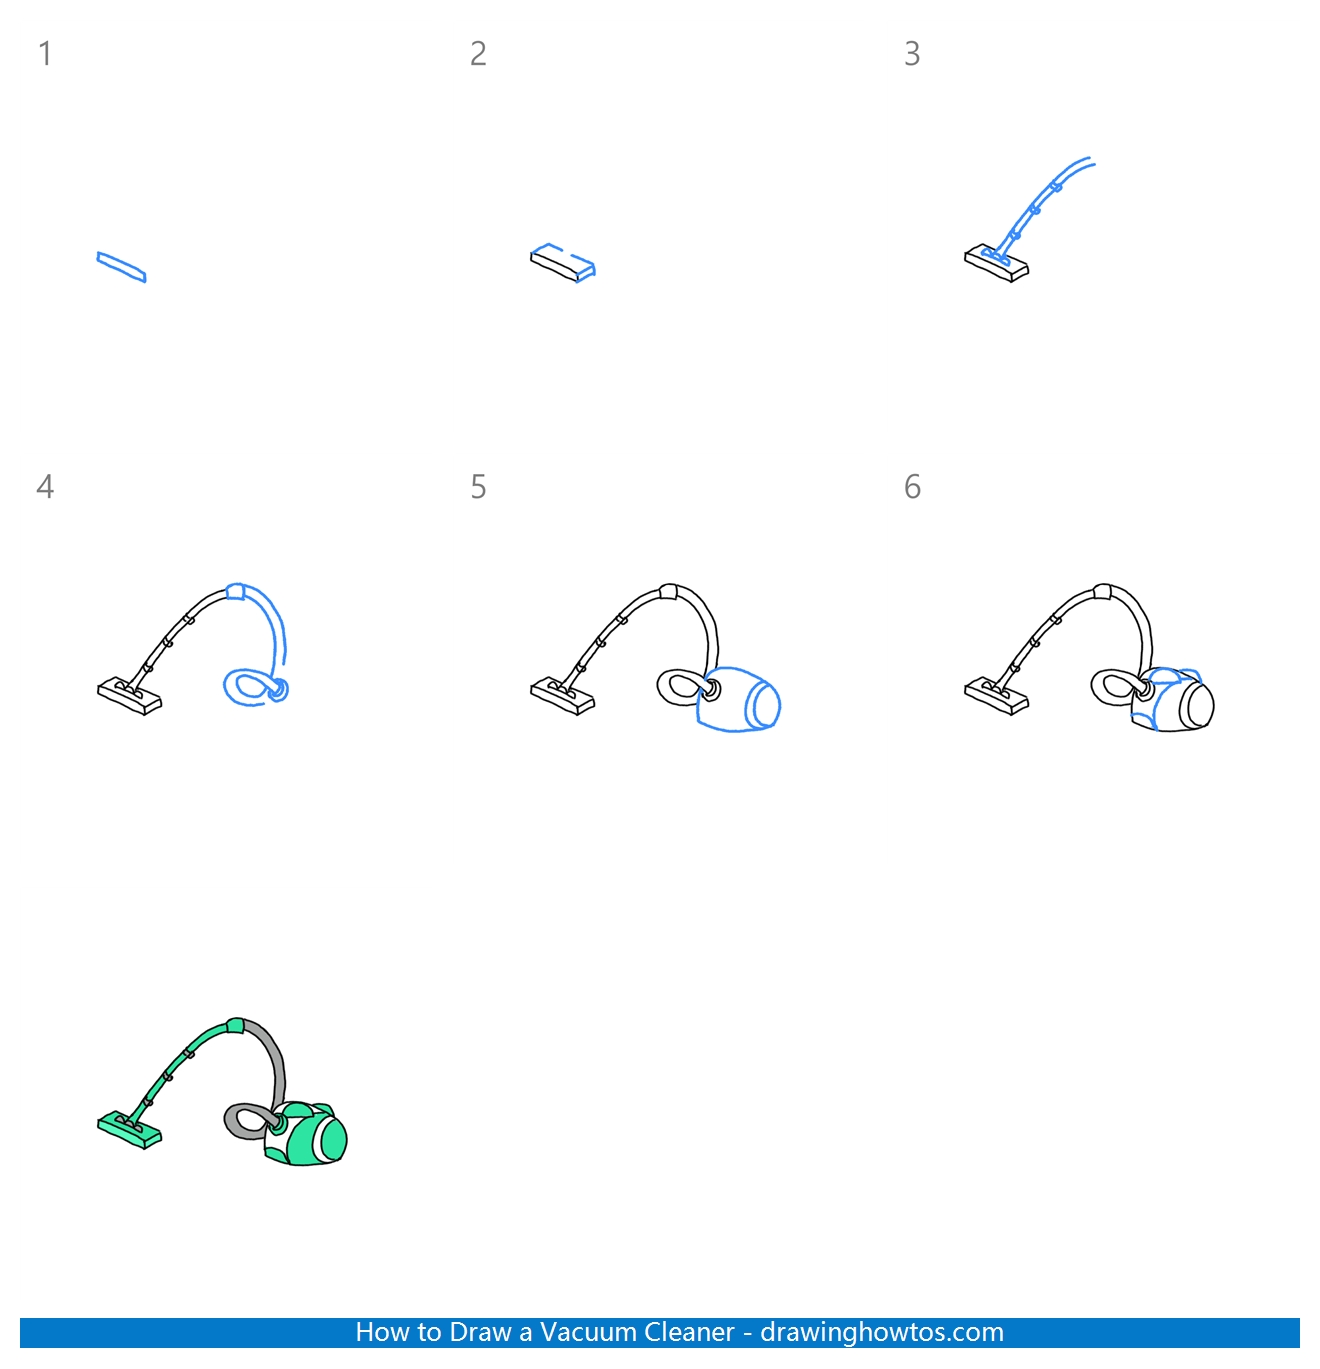 How to Draw a Vacuum Cleaner Step by Step